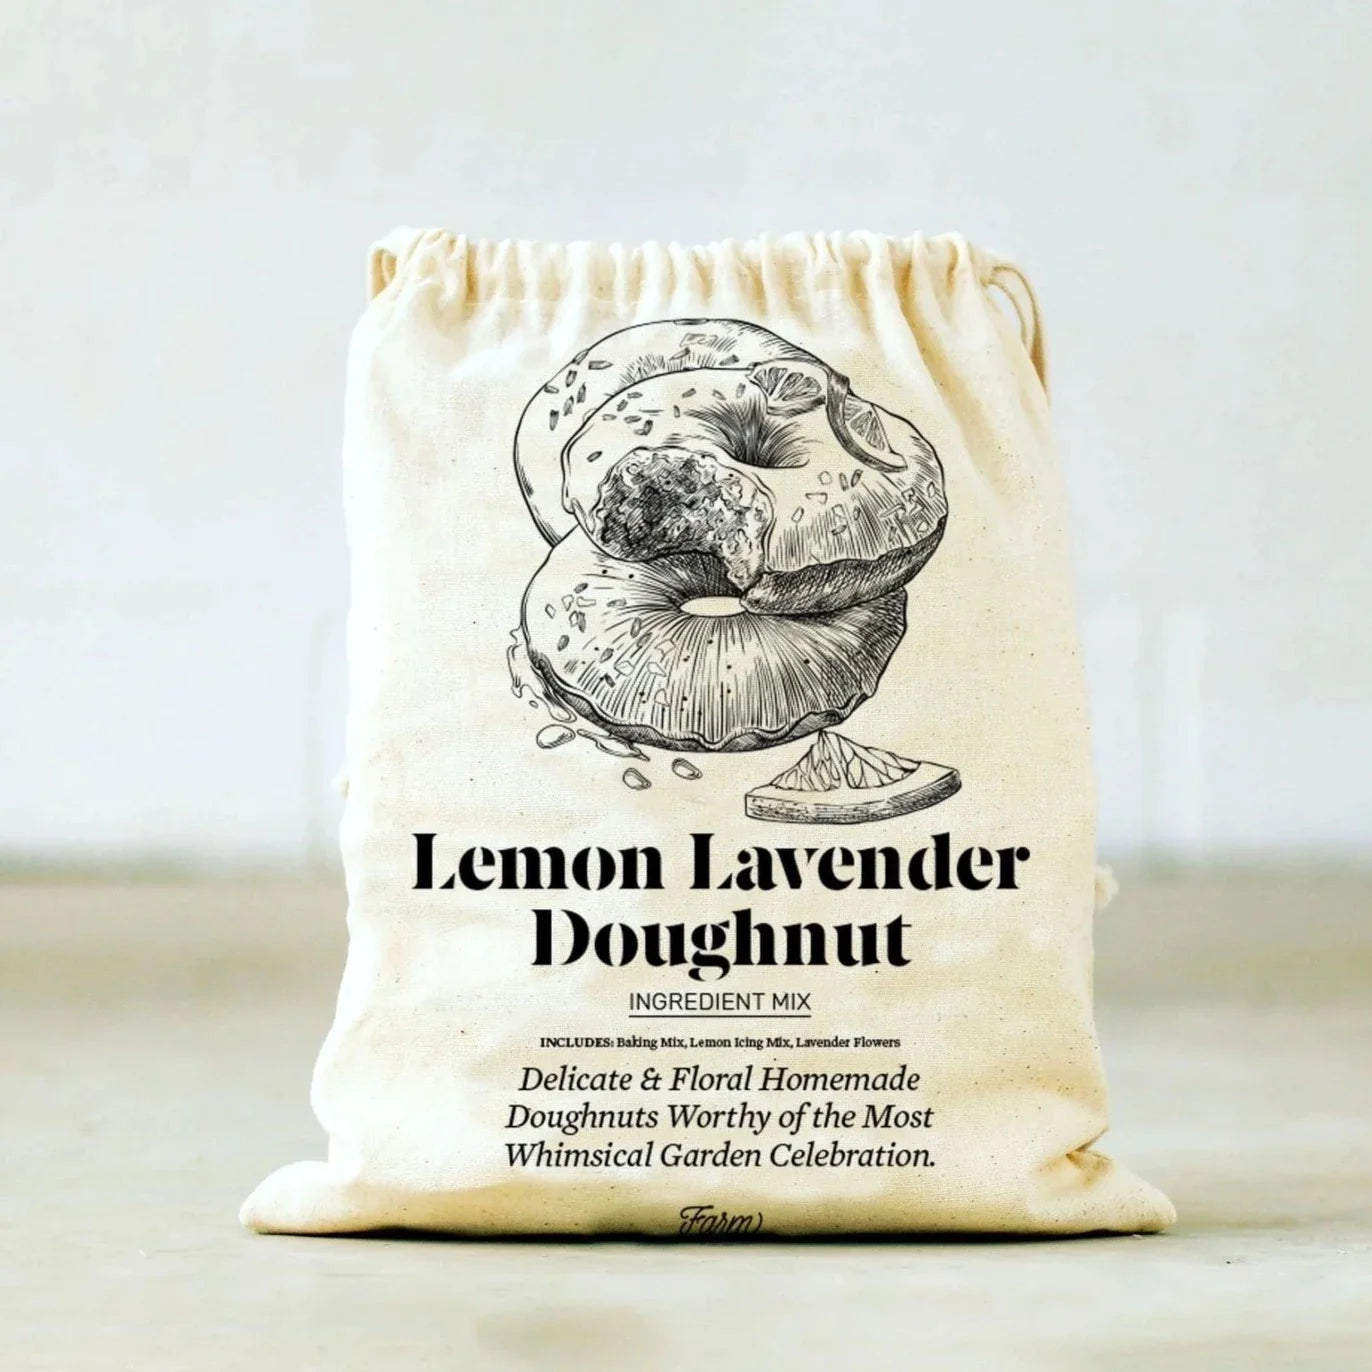 leom lavender bought mix in a canvas drawstring bag. printed on the bag is a lemon lavender doughnut and name of product